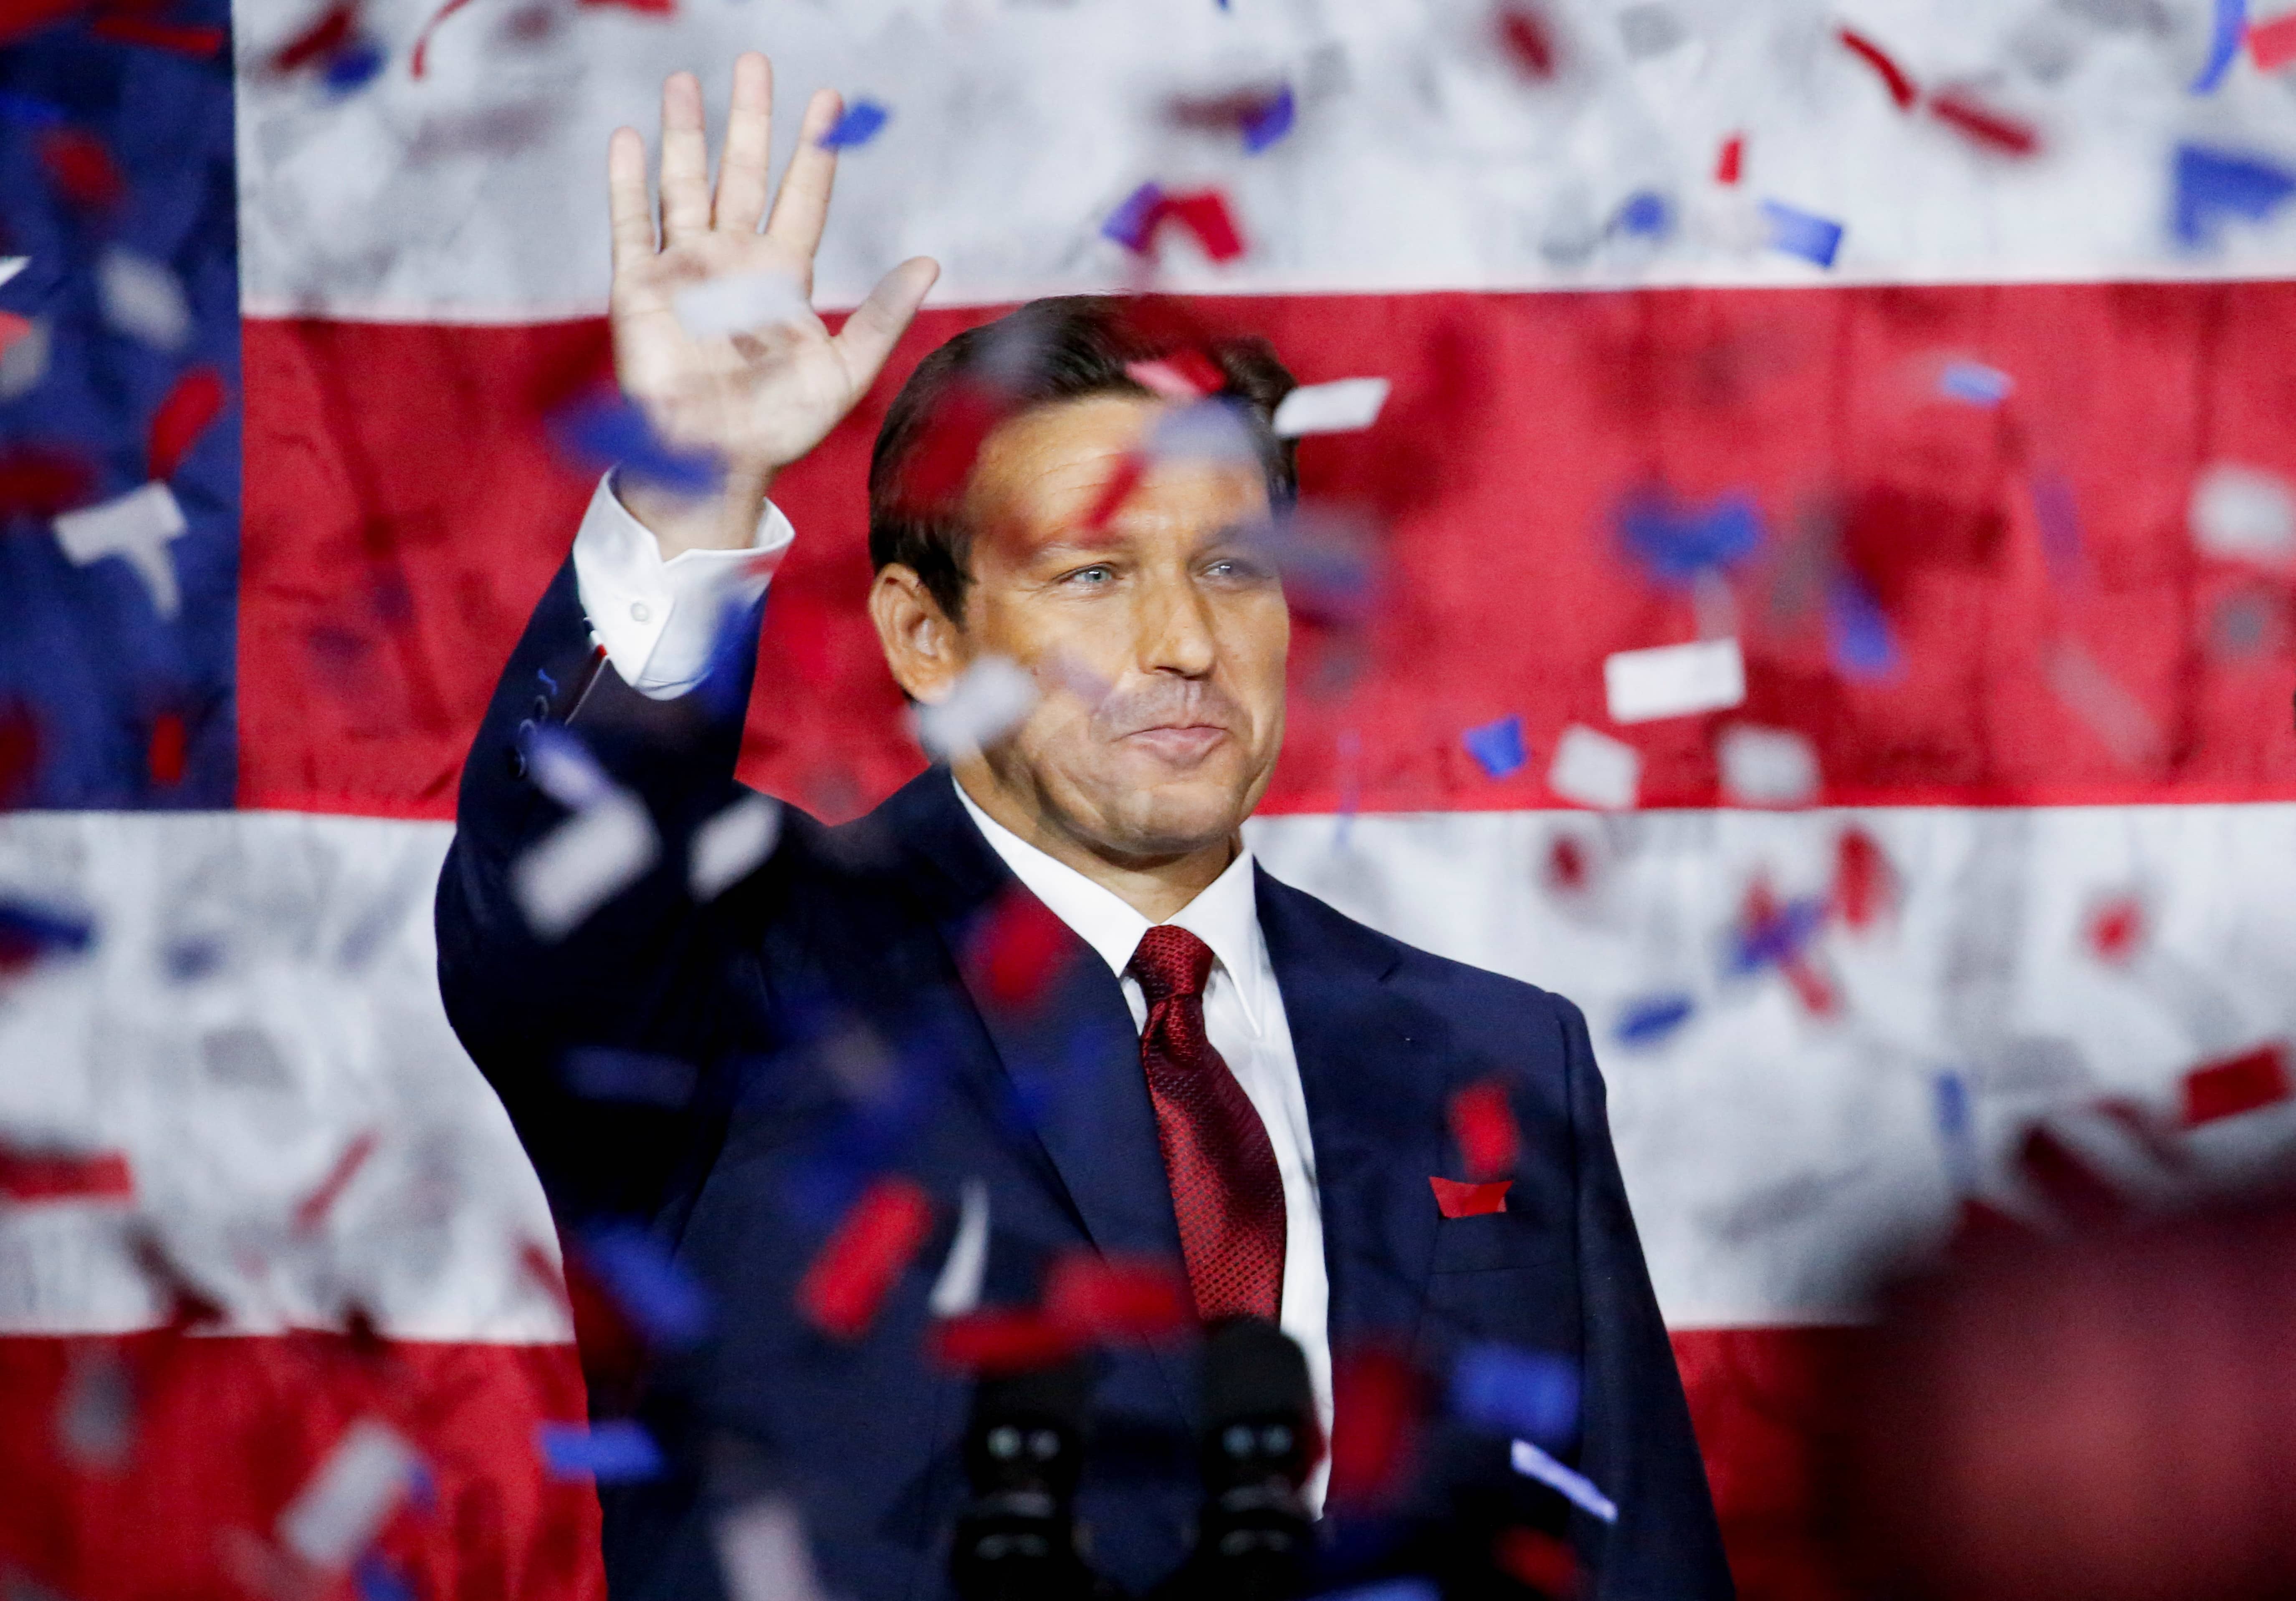 republican-governor-desantis-holds-2022-u-s-midterm-elections-night-party-in-tampa-florida